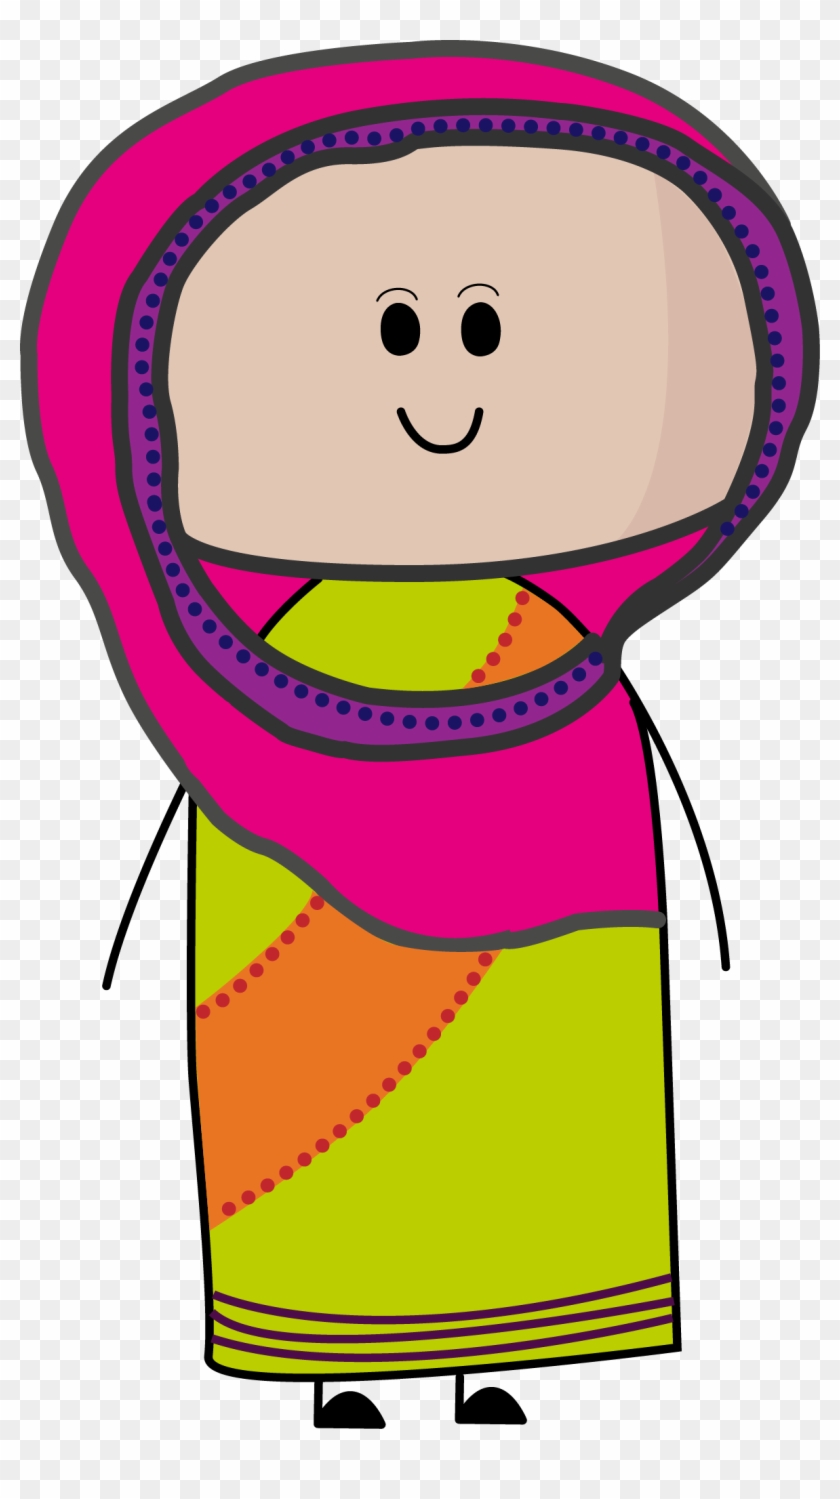 Cute Hindu Indian Clipart Character Vector Illustrated - Cute Hindu Indian Clipart Character Vector Illustrated #392381